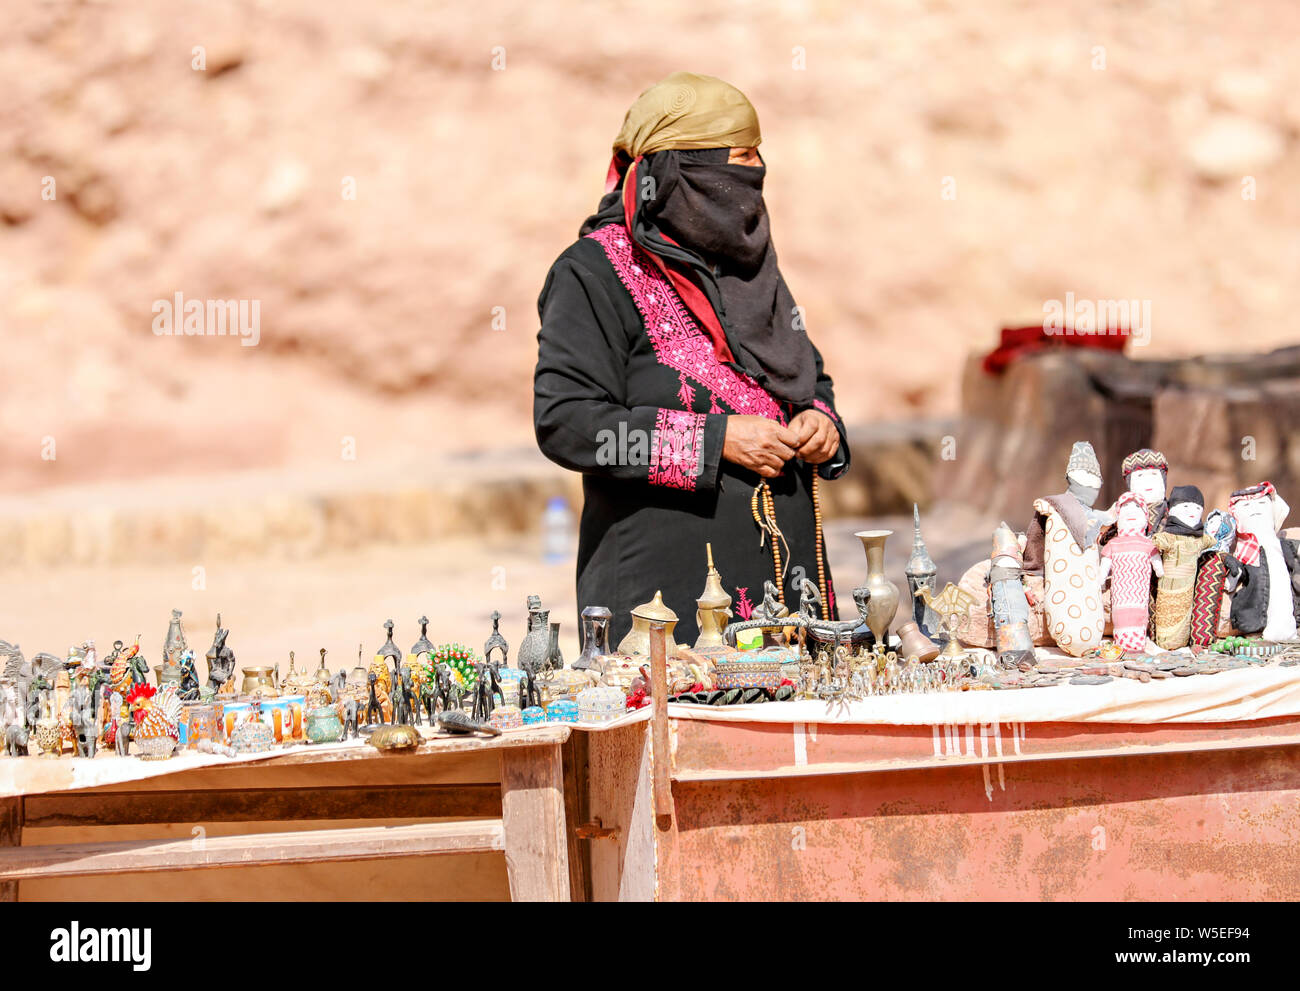 Muslim woman in traditional dress, fully covered, sales her goods at a stand in Petra, Jordan. Stock Photo